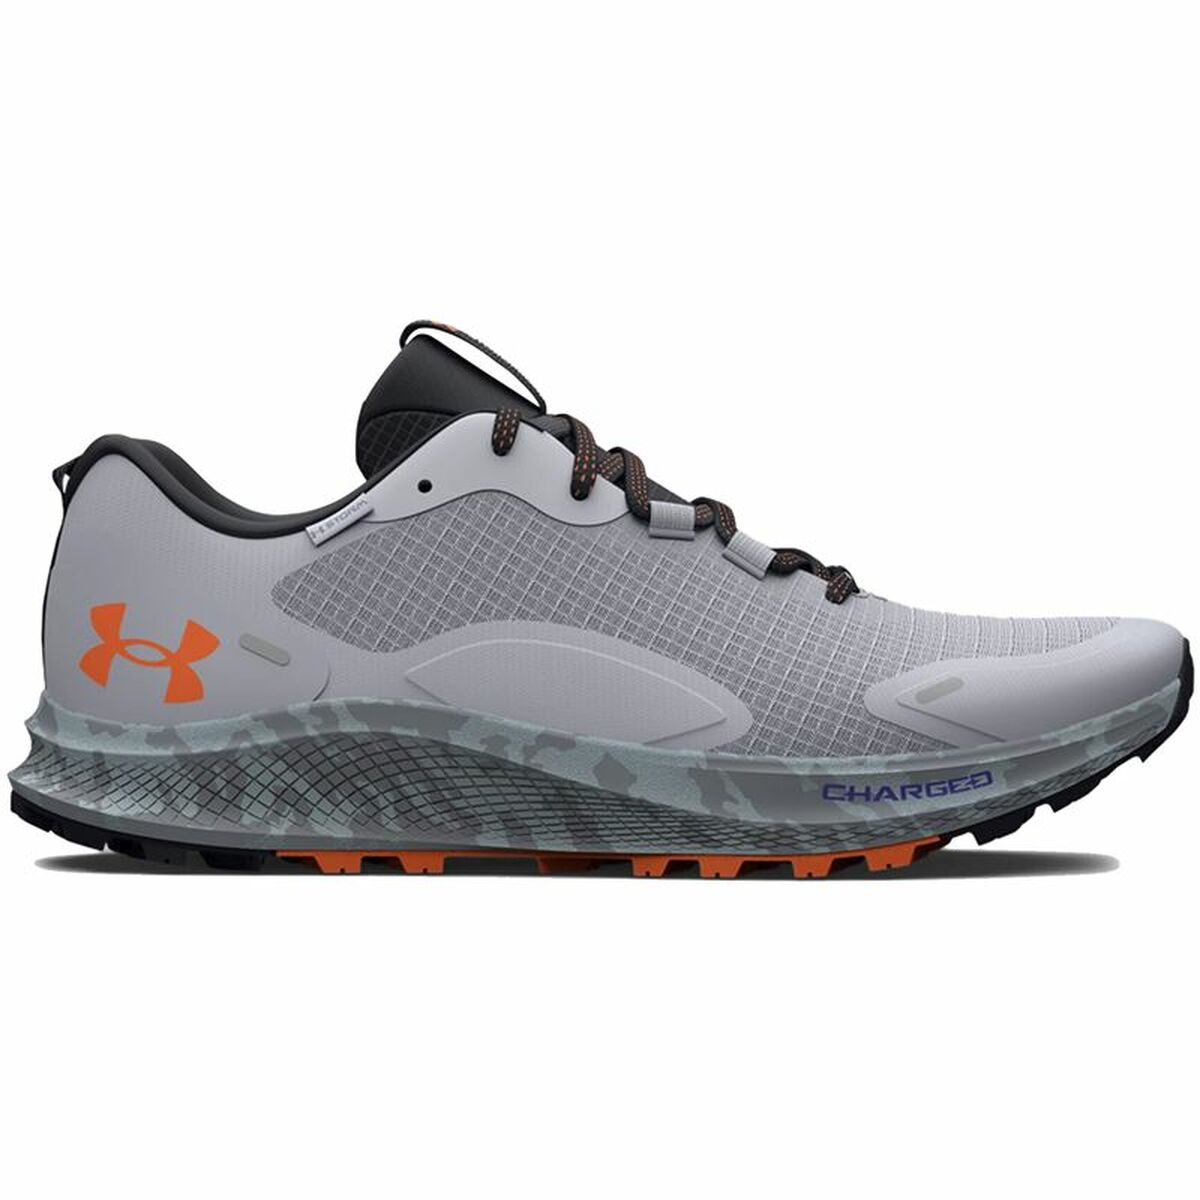 Chaussures de Running pour Adultes Under Armour Charged Bandit 2 Gris Homme